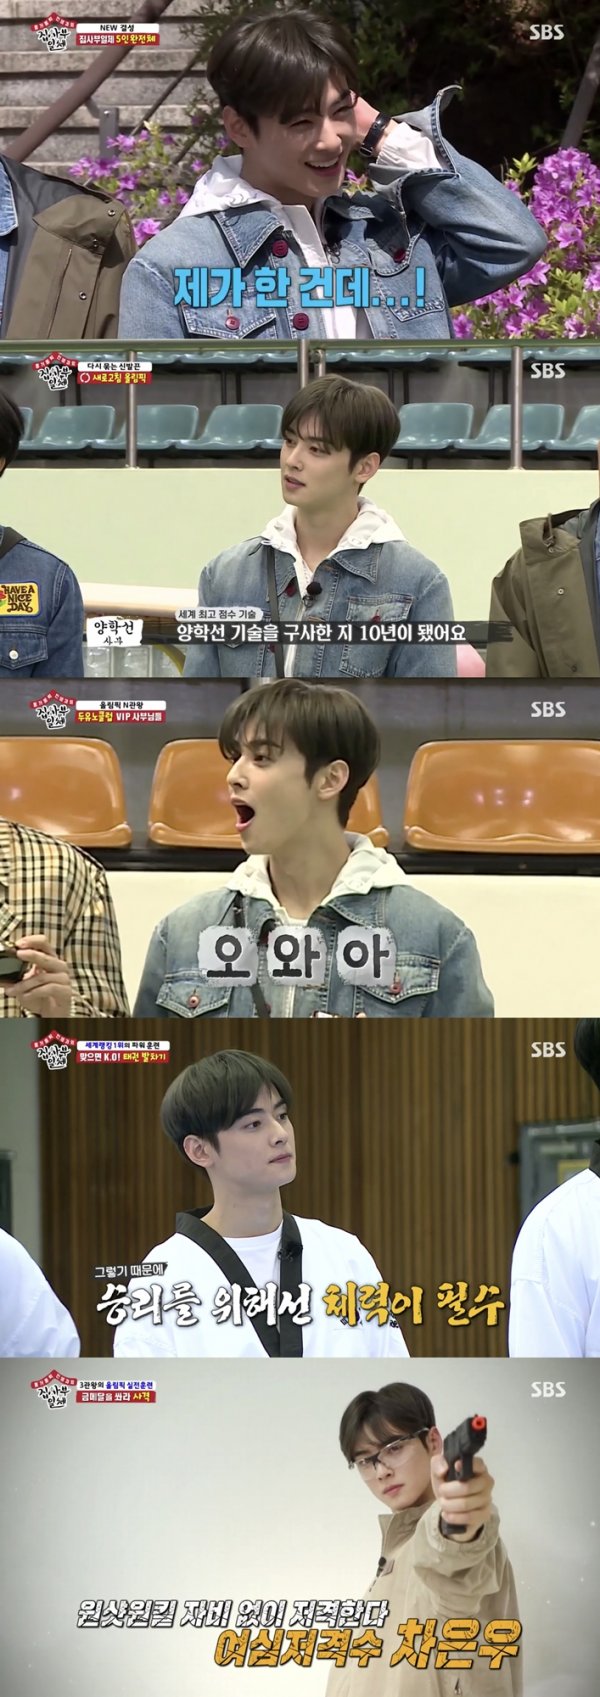 In the SBS entertainment All The Butlers, which was broadcast on the 3rd, the meeting between the newly completed five disciples and the Olympic Games Legend Master was drawn with the joining of Cha Eun-woo.Cha Eun-woo said, I see this, when the Olympian Games active role Legend Jin Jong-oh, Yang Hak-sun, and Lee Dae-hoon showed up as masters in the All The Butlers, where the 365 Refresh Olympian Games Can I do it? he said, admiring it.In the first Taekwondo training with Master Lee Dae-hoon, Cha Eun-woo was recognized as Ace.Cha Eun-woo, who was admiring the demonstration of Le Bron Basketball Battle: Mortal Combat Warr, whose masters dimension is different, was immediately inspired by the Le Bron Basketball Battle: Mortal Combat Warr experience, He showed me r.Master Lee Dae-hoon praised Cha Eun-woos Le Bron Basketball Battle: Mortal Combat Warr as the first Ace.In a 5–1 matchup with the Masters, thanks to praise, Cha Eun-woo led the team to a win with a one-shot Le Bron Basketball Battle: Mortal Combat Warr.In addition, during the shooting training of Master Jin Jong-oh, he survived to the end with Lee Seung-gi in the long-lasting mission and was reborn as a passion Iruvar.As such, Cha Eun-woo has caught the attention of his disciples who bring new winds to All The Butlers.In addition to the openings acupressure foothold, the masters powerful Le Bron Basketball Battle: Mortal Combat Warr also endured and showed his commitment, and received praise from the masters in an active movement stemming from the desire to win.Among them, Le Bron Basketball Battle: Mortal Combat Warr, and seeing ice cream that falls or rewards, like a child, gives viewers a smile.Cha Eun-woo, who joined All The Butlers and delivered new energy to the house theater on the weekend evening, is looking forward to more challenges and enthusiasm to show in the future.On the other hand, SBS entertainment All The Butlers, starring Cha Eun-woo, will be broadcast every Sunday at 6:25 pm.